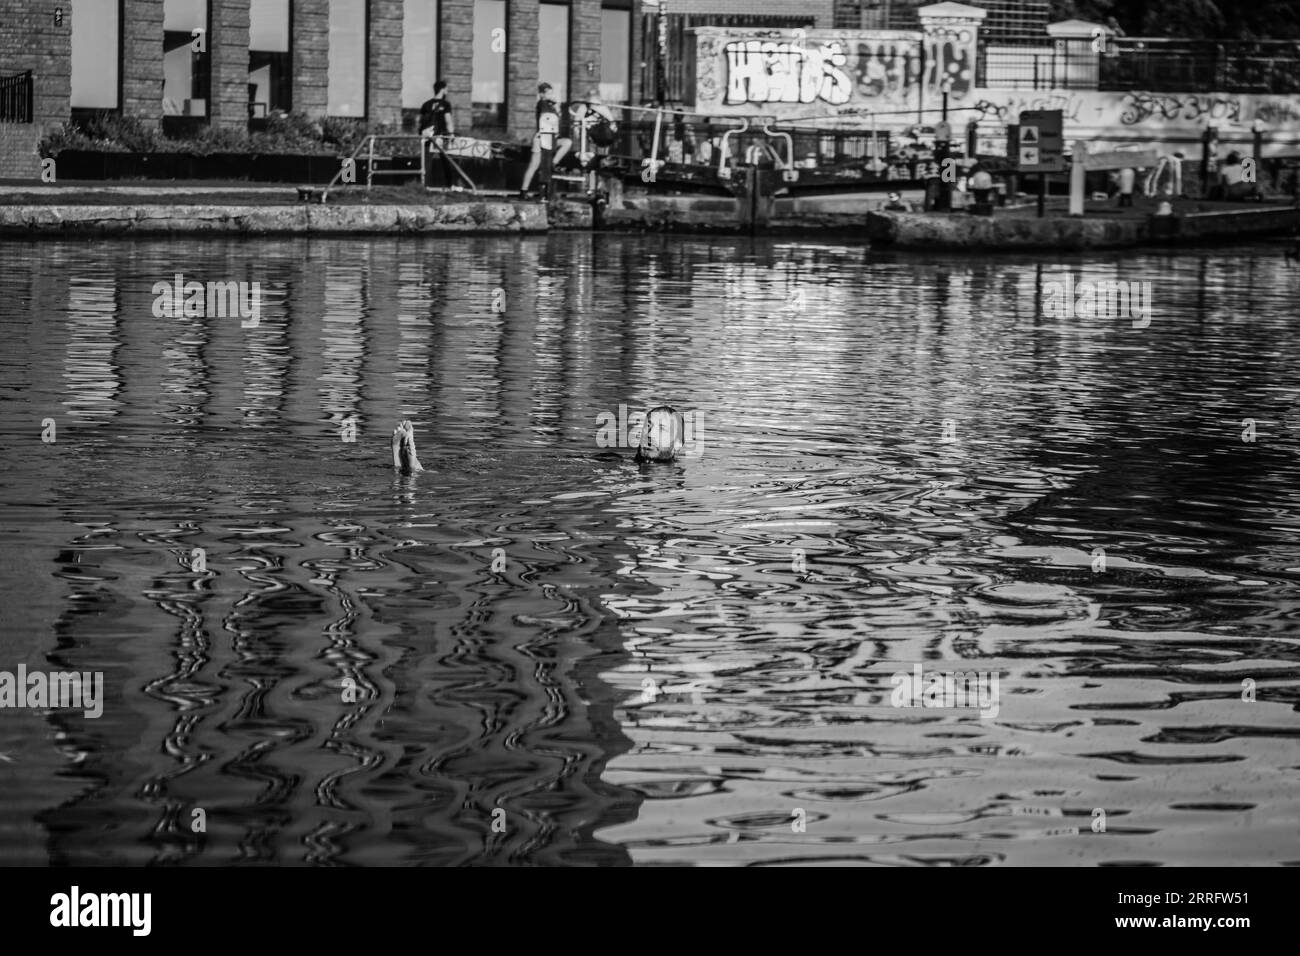 A man stays cool swimming in the regents canal in London's Camden. Stock Photo